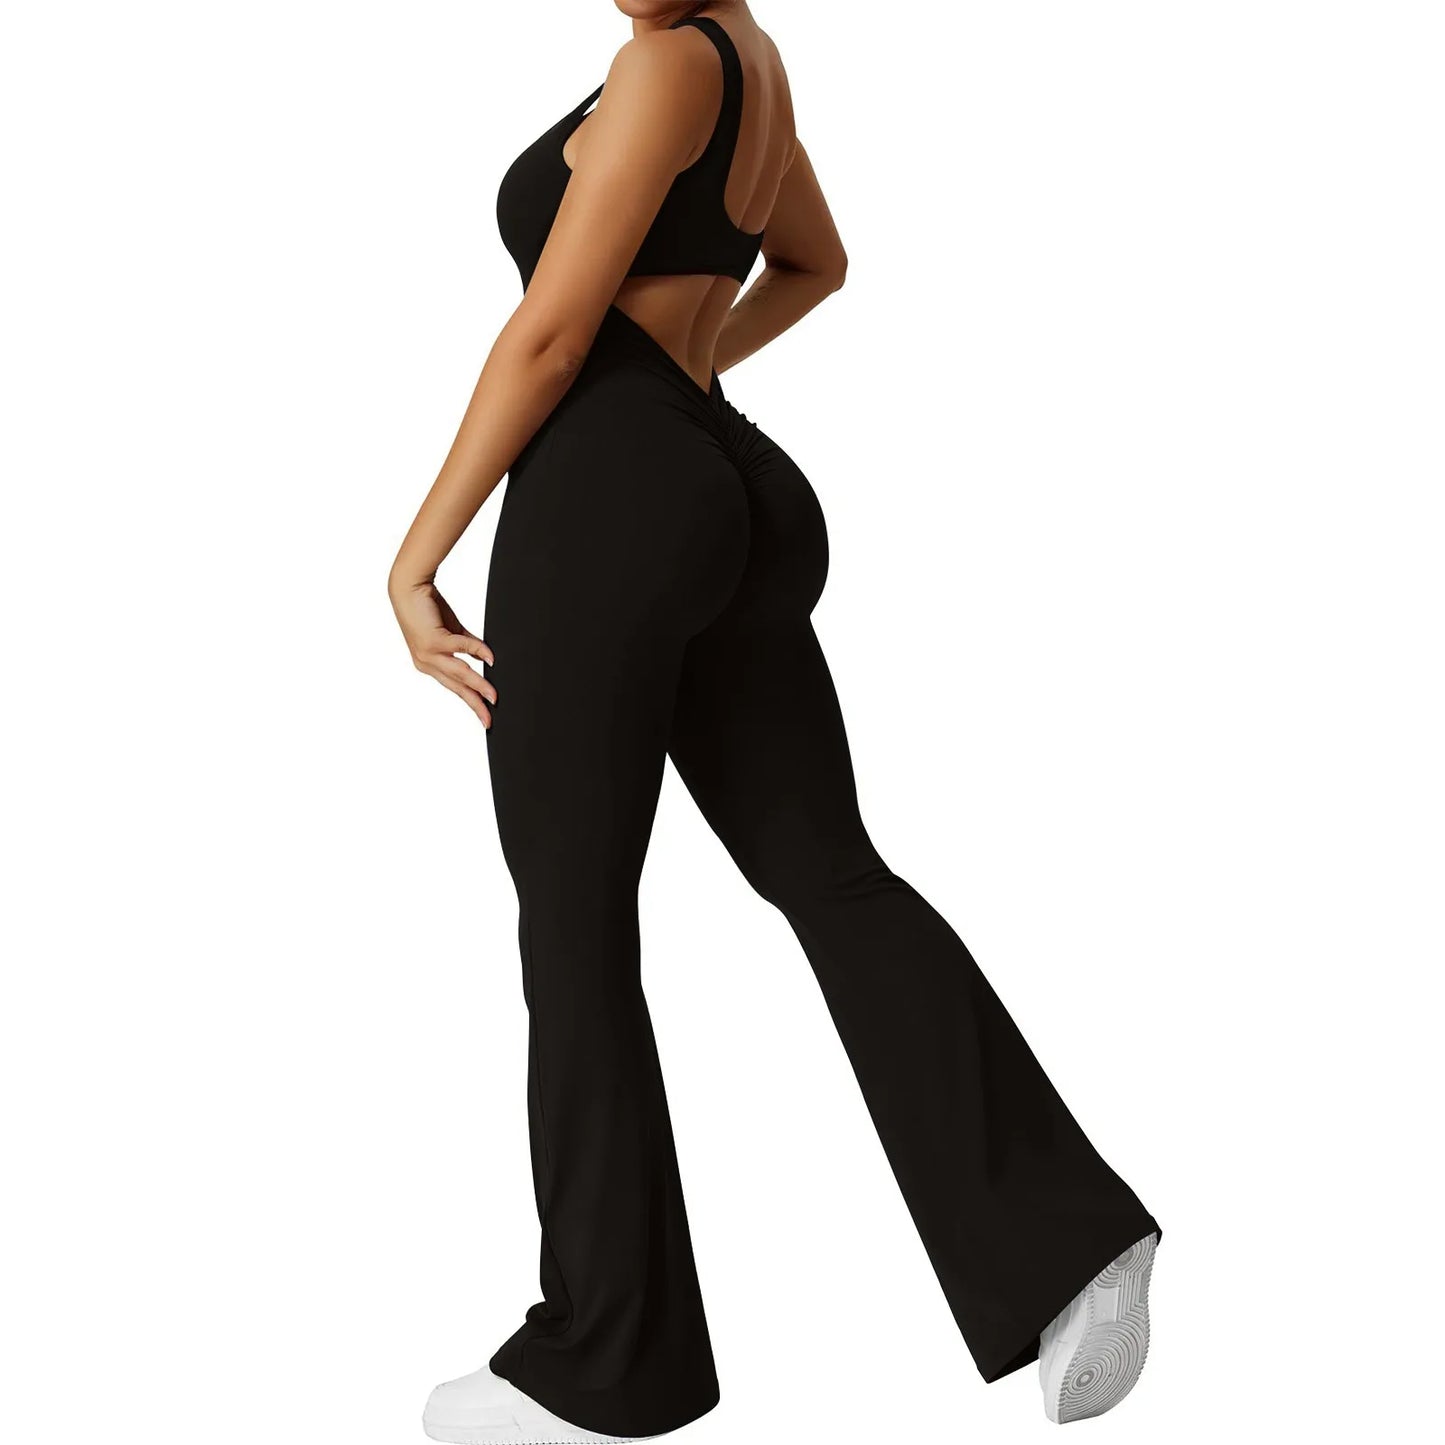 Women's Fashion Jumpsuit Solid Color Sexy Backless Tight Fitting Clothing Elastic Sports Sleeveless Jumpsuit комбинезон женский